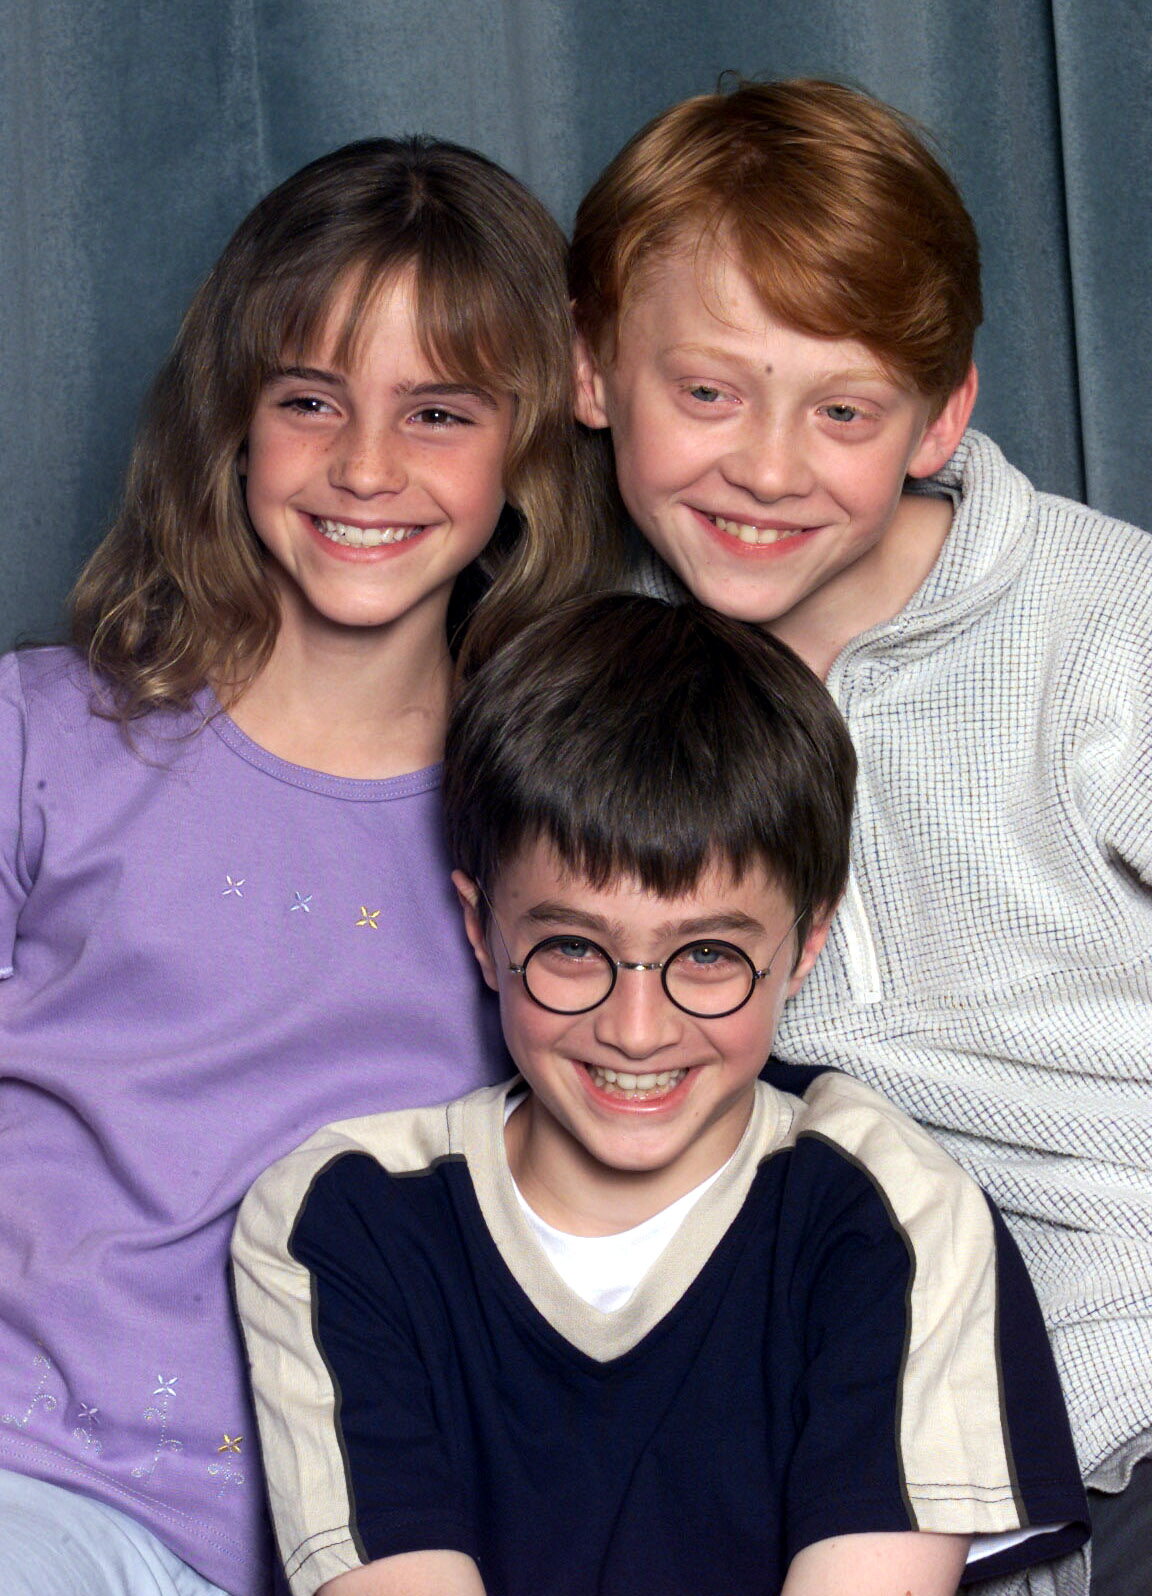 Emma Watson, Rupert Grint, and Daniel Radcliffe are pictured at a photocall to present the new cast of the "Harry Potter" films on August 23, 2000, in London, England | Source: Getty Images